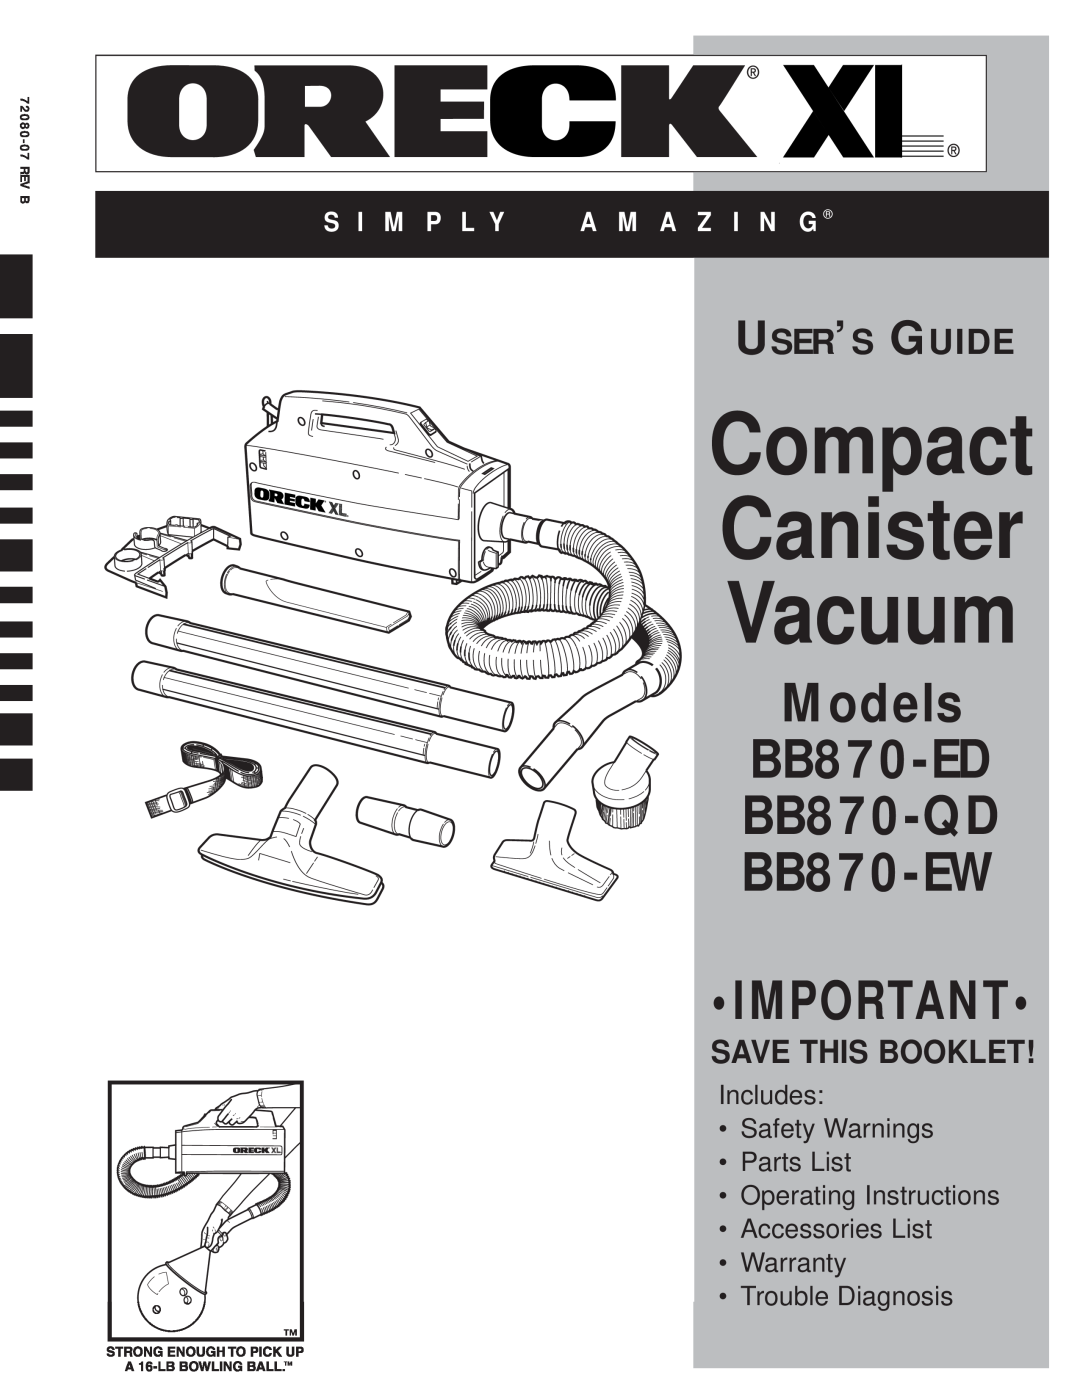 Oreck warranty Compact Canister Vacuum, Models BB870-ED BB870-QD BB870-EW, User’S Guide, Save This Booklet, S I M P L Y 